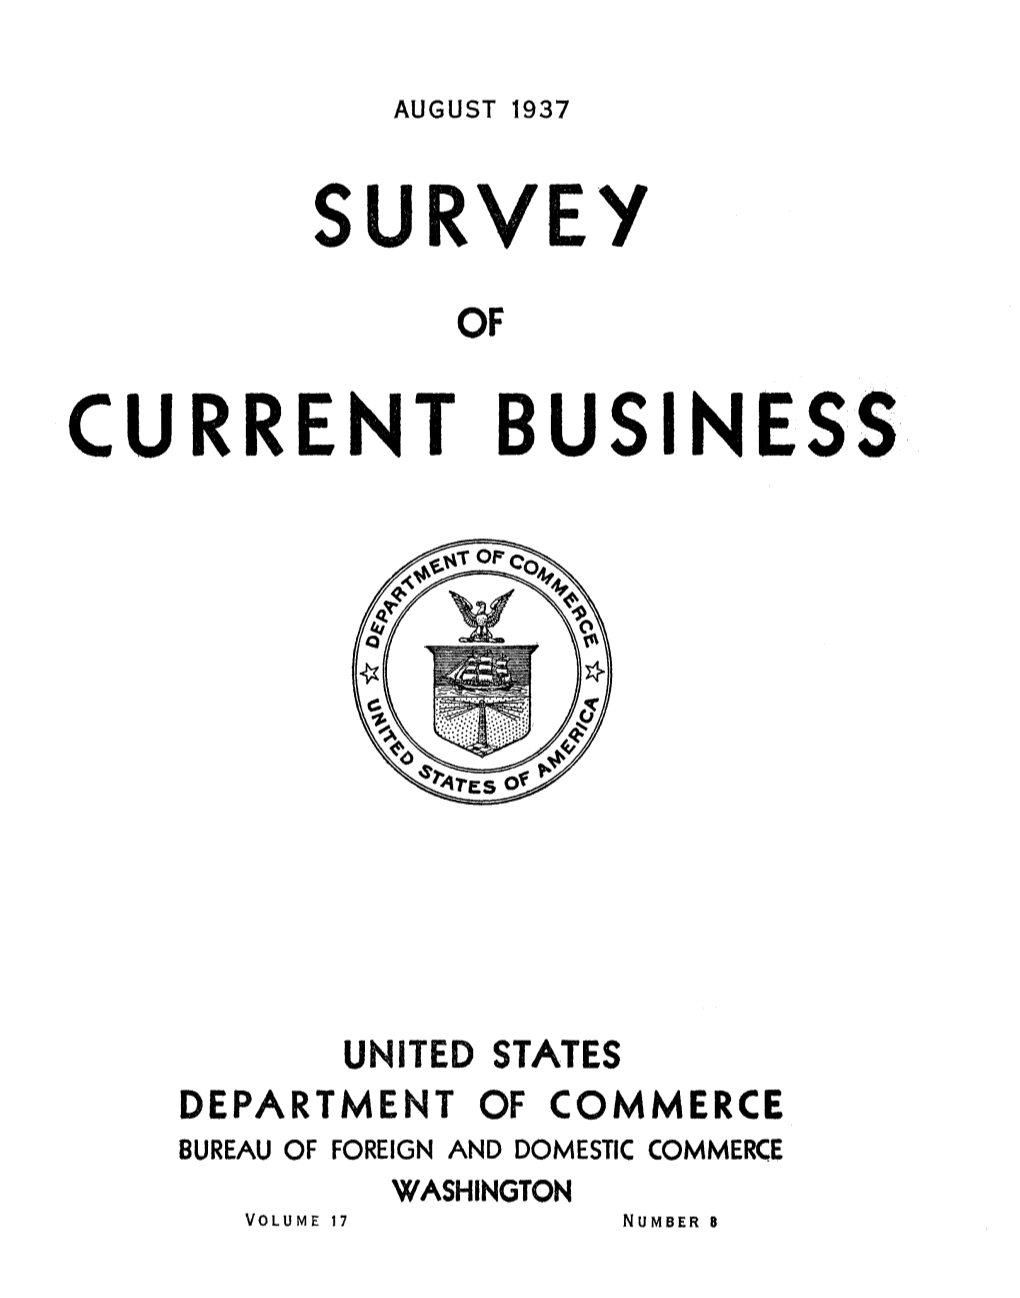 SURVEY of CURRENT BUSINESS August 1937